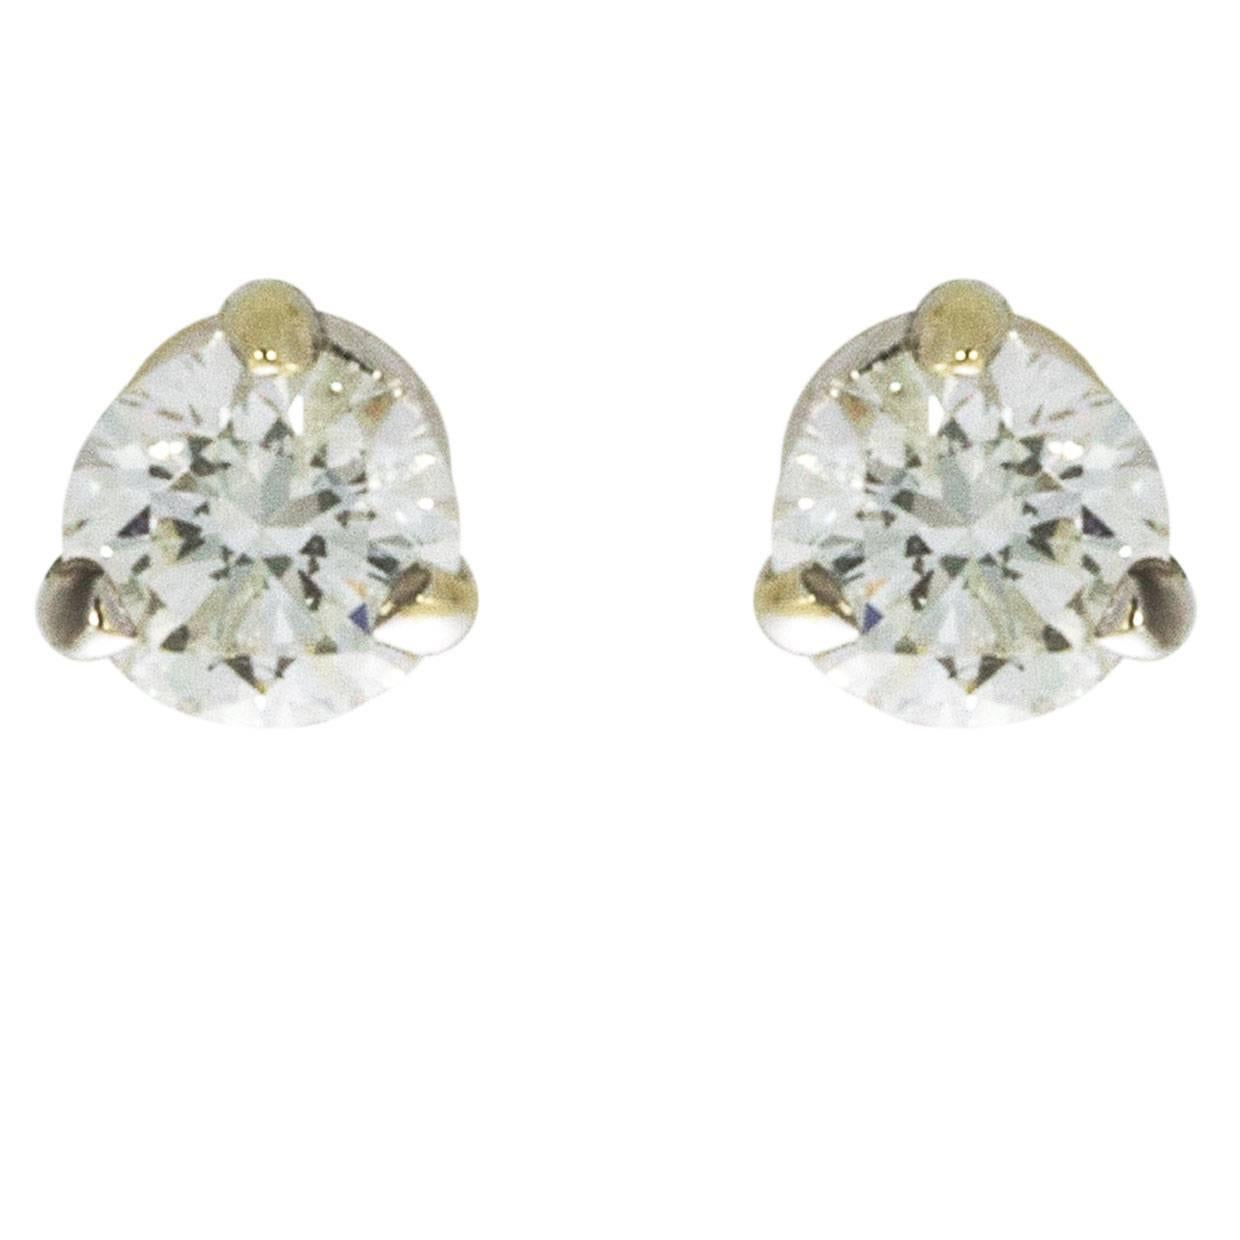 White Gold .40 Carat Round Diamond 3-Prong Solitaire Stud Earrings